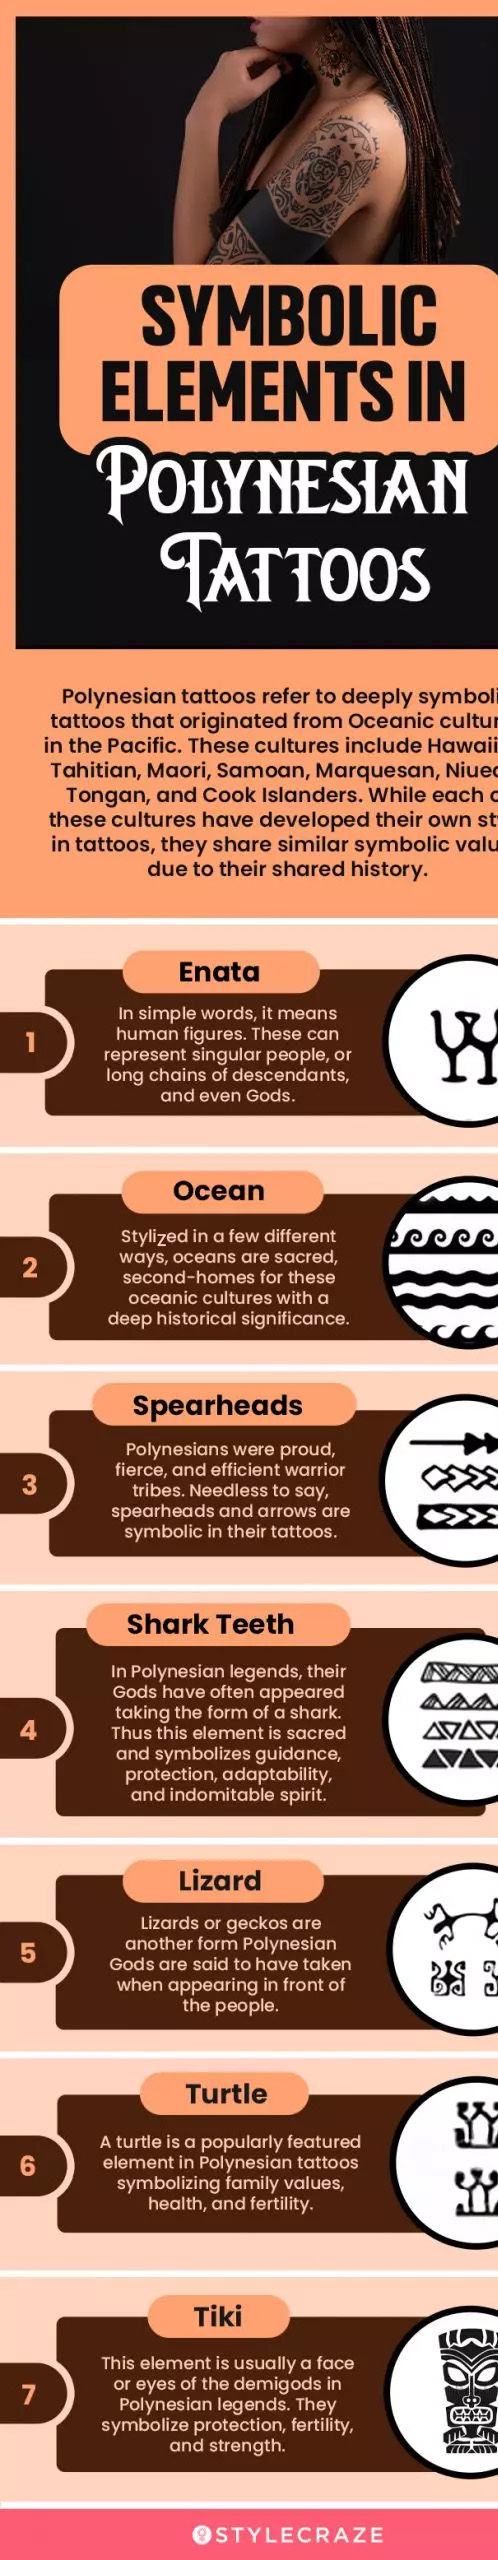 symbolic elements in polynesian tattoos (infographic)